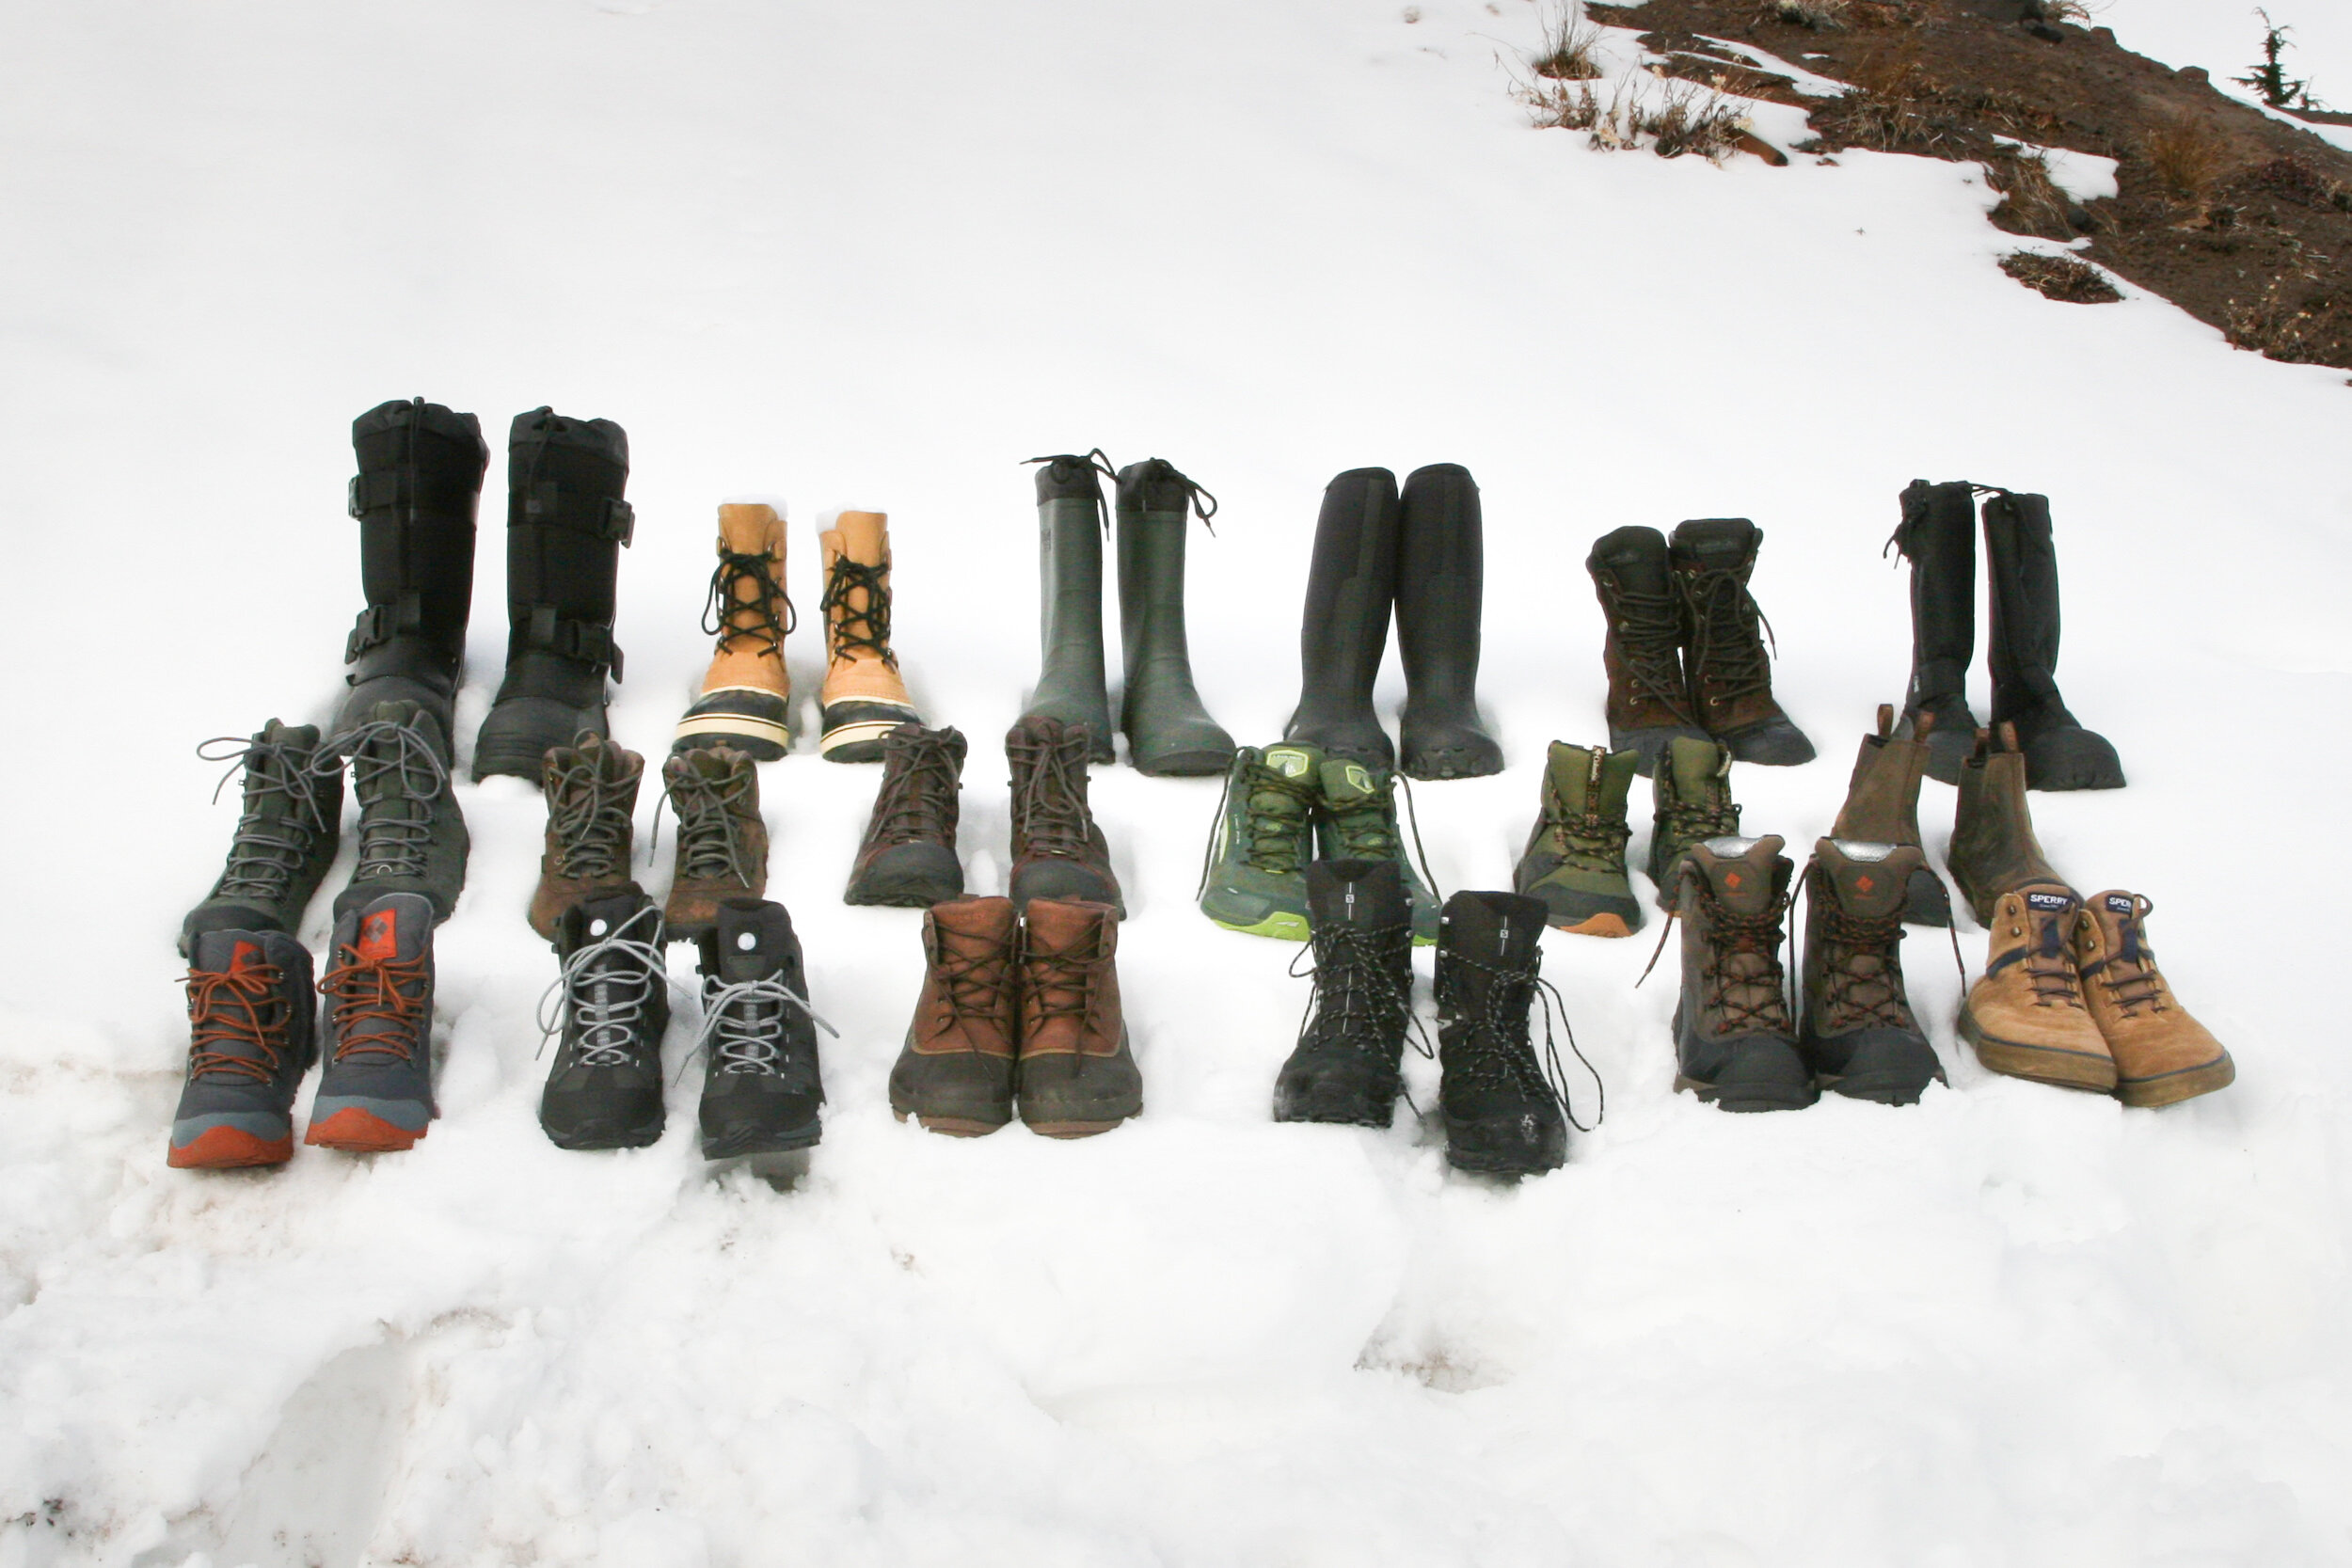 We own and use all of the winter boots we recommend.